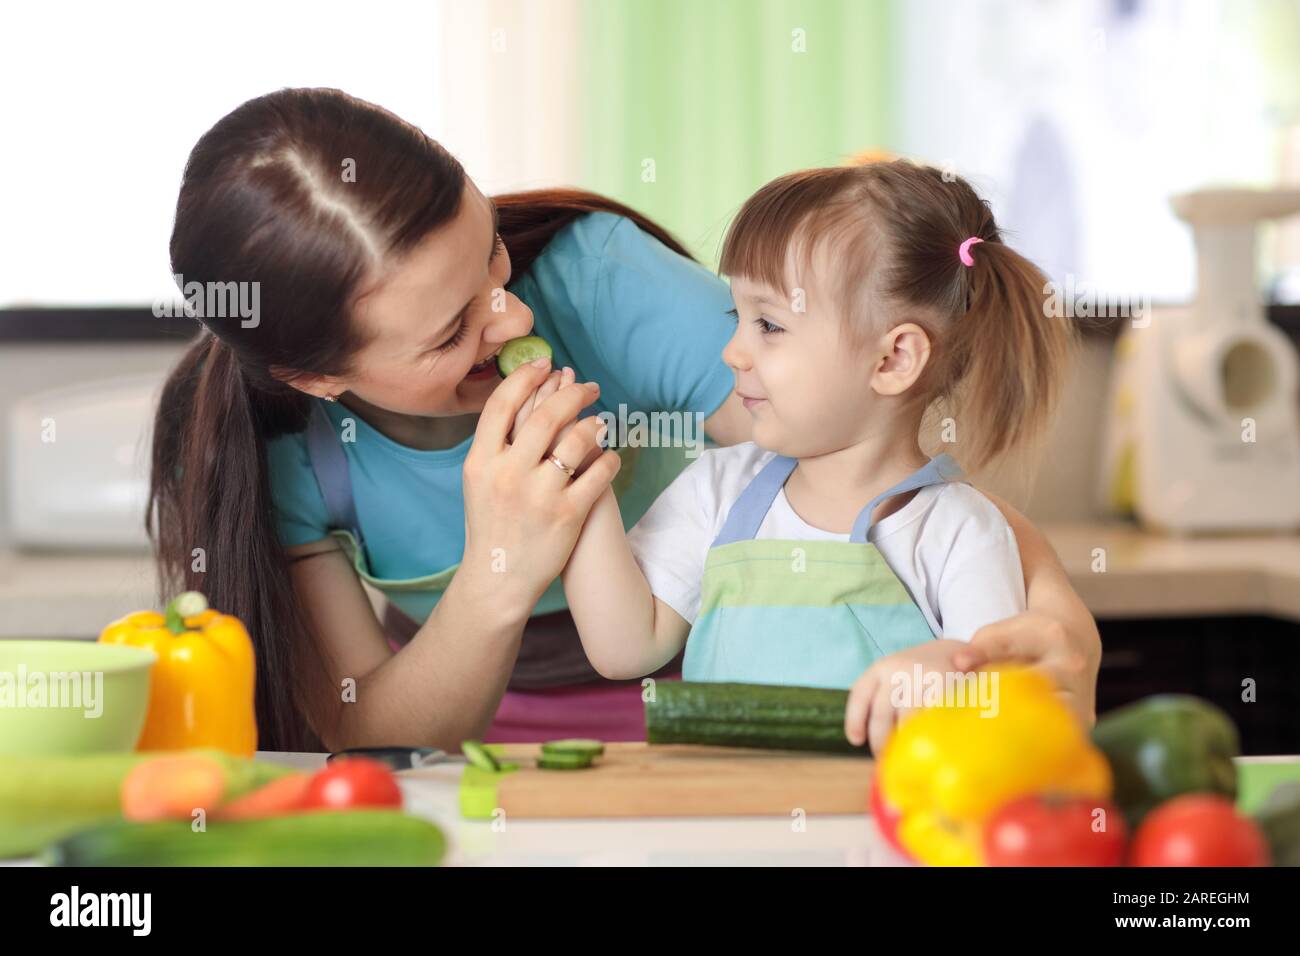 Child girl and her mother cooking in kitchen Stock Photo